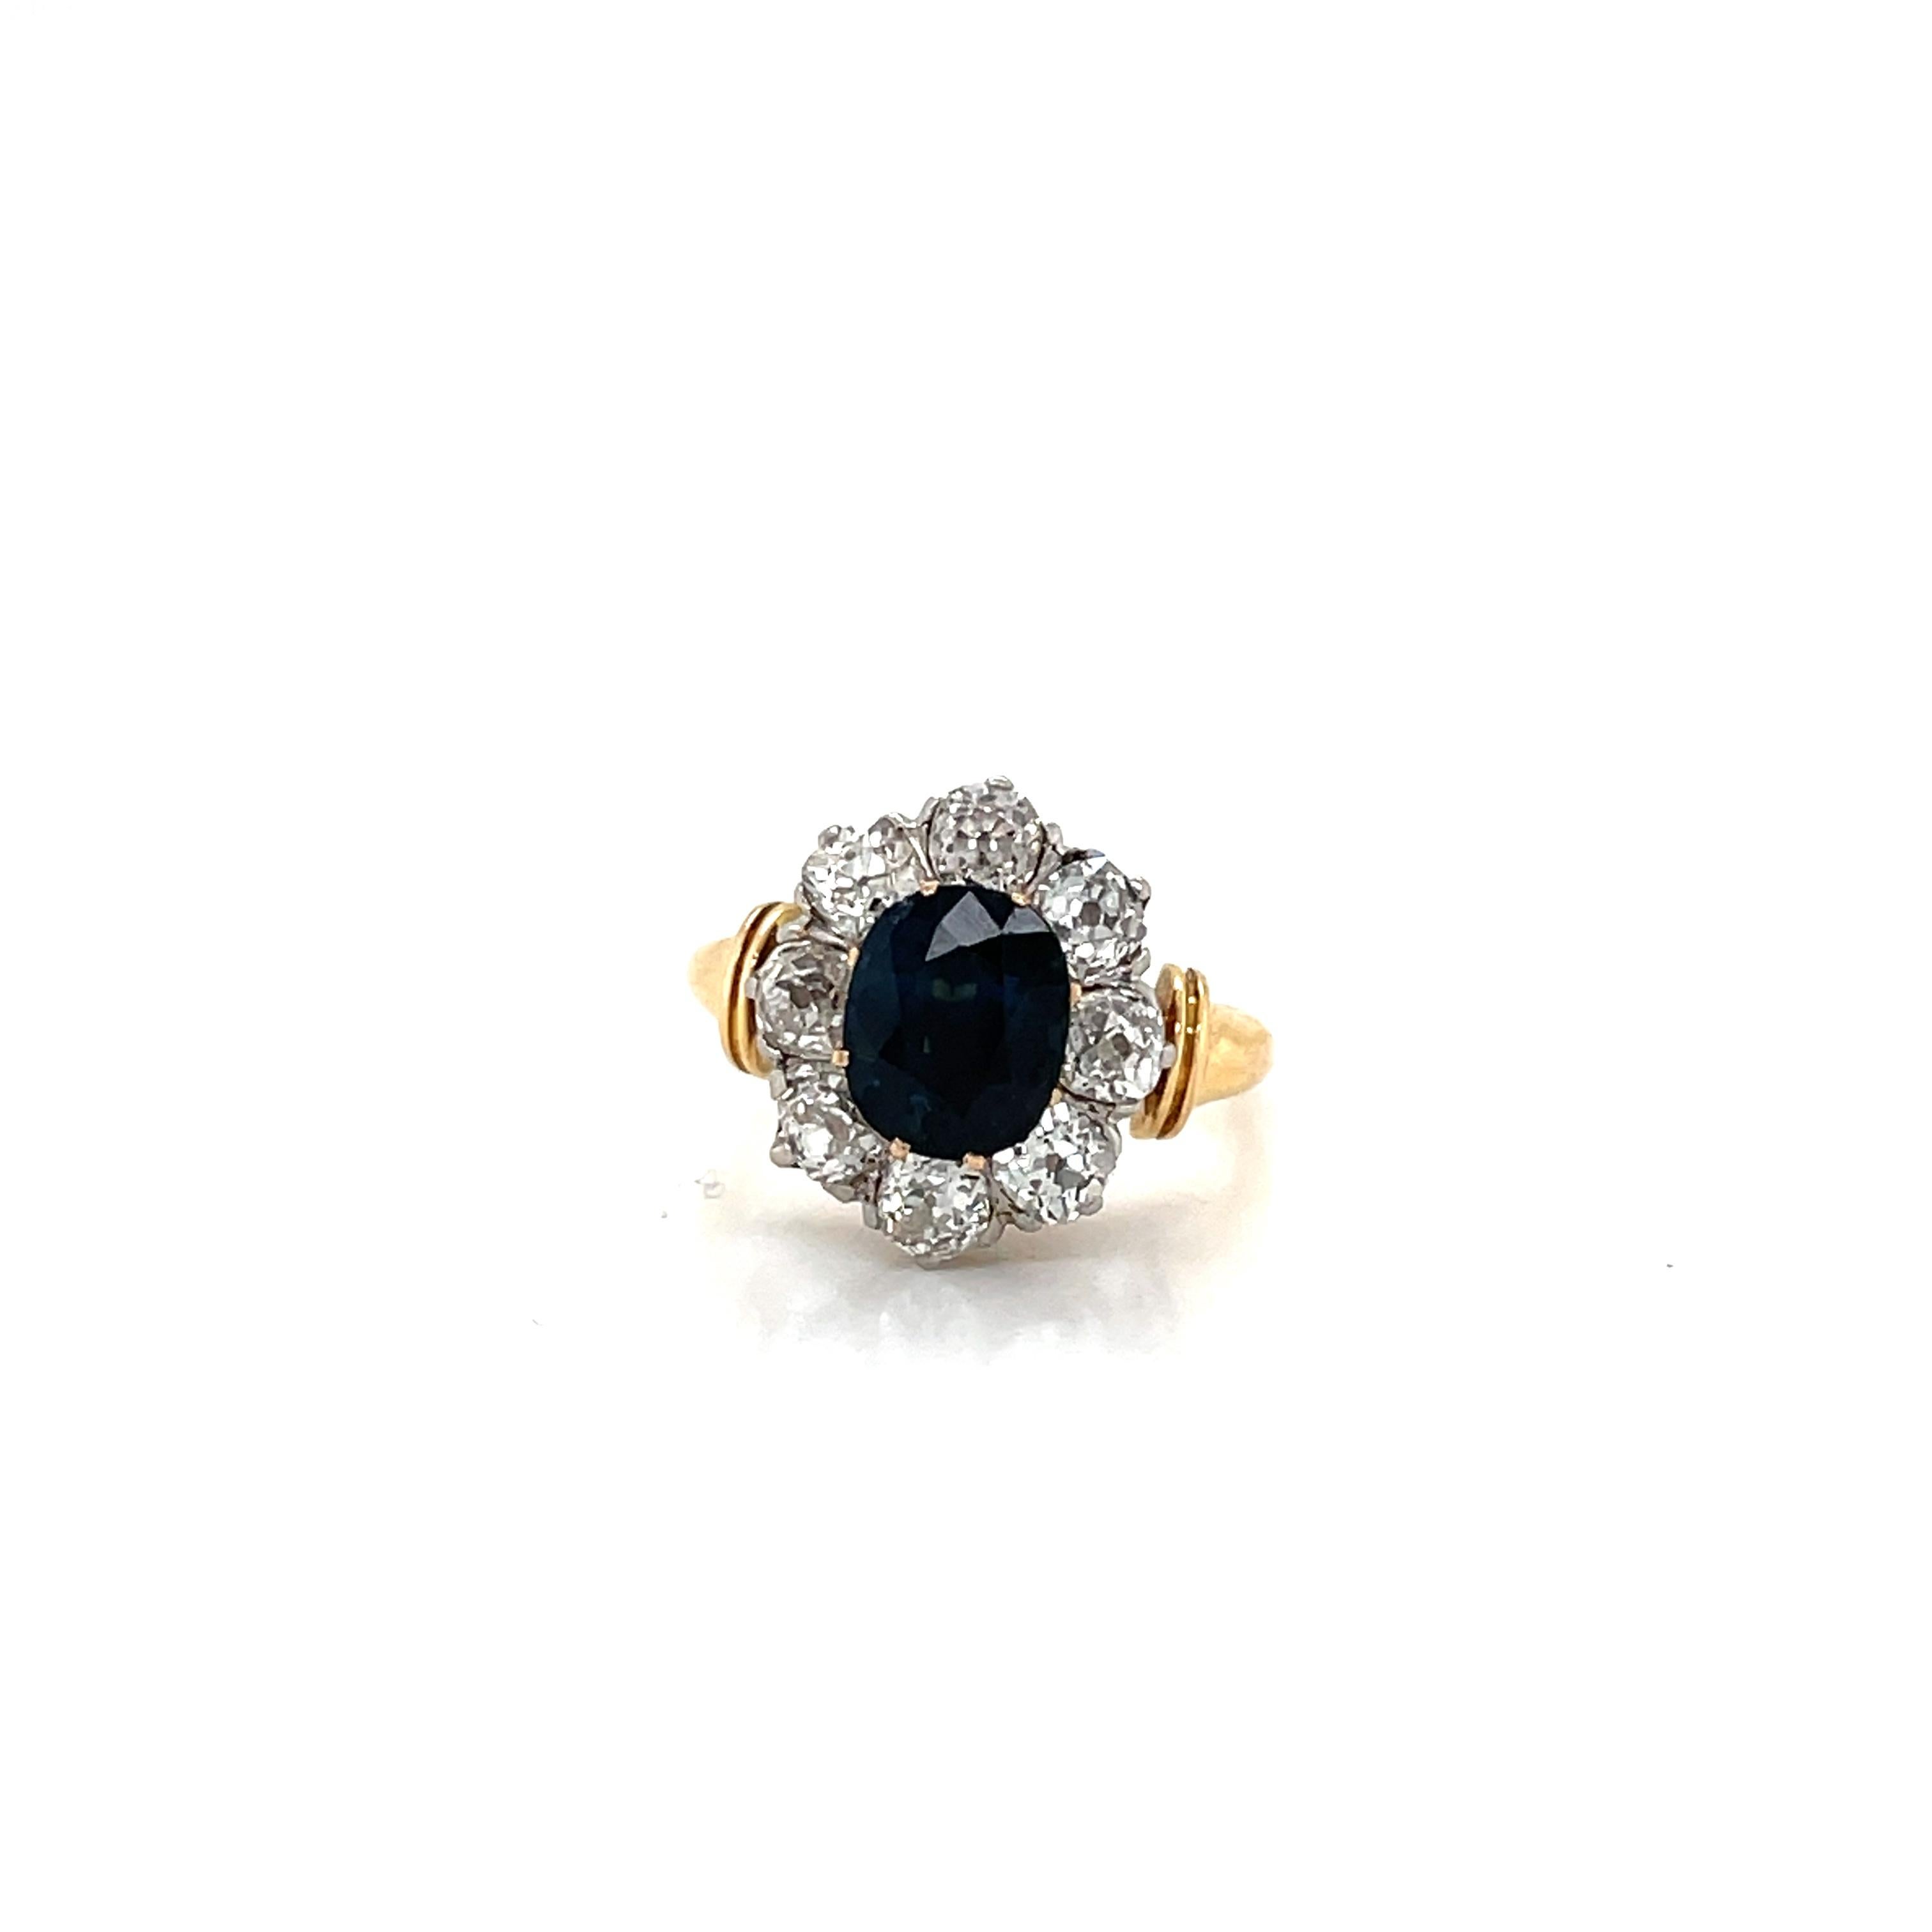 Beautiful 18k yellow gold and platinum cluster ring. It features in the center one vivid Natural Sapphire oval shape, origin Australian, weight 2,20 ct, surrounded by Sparkling Old mine cut diamond weighing 1,60 ct. all together, graded H color Vs